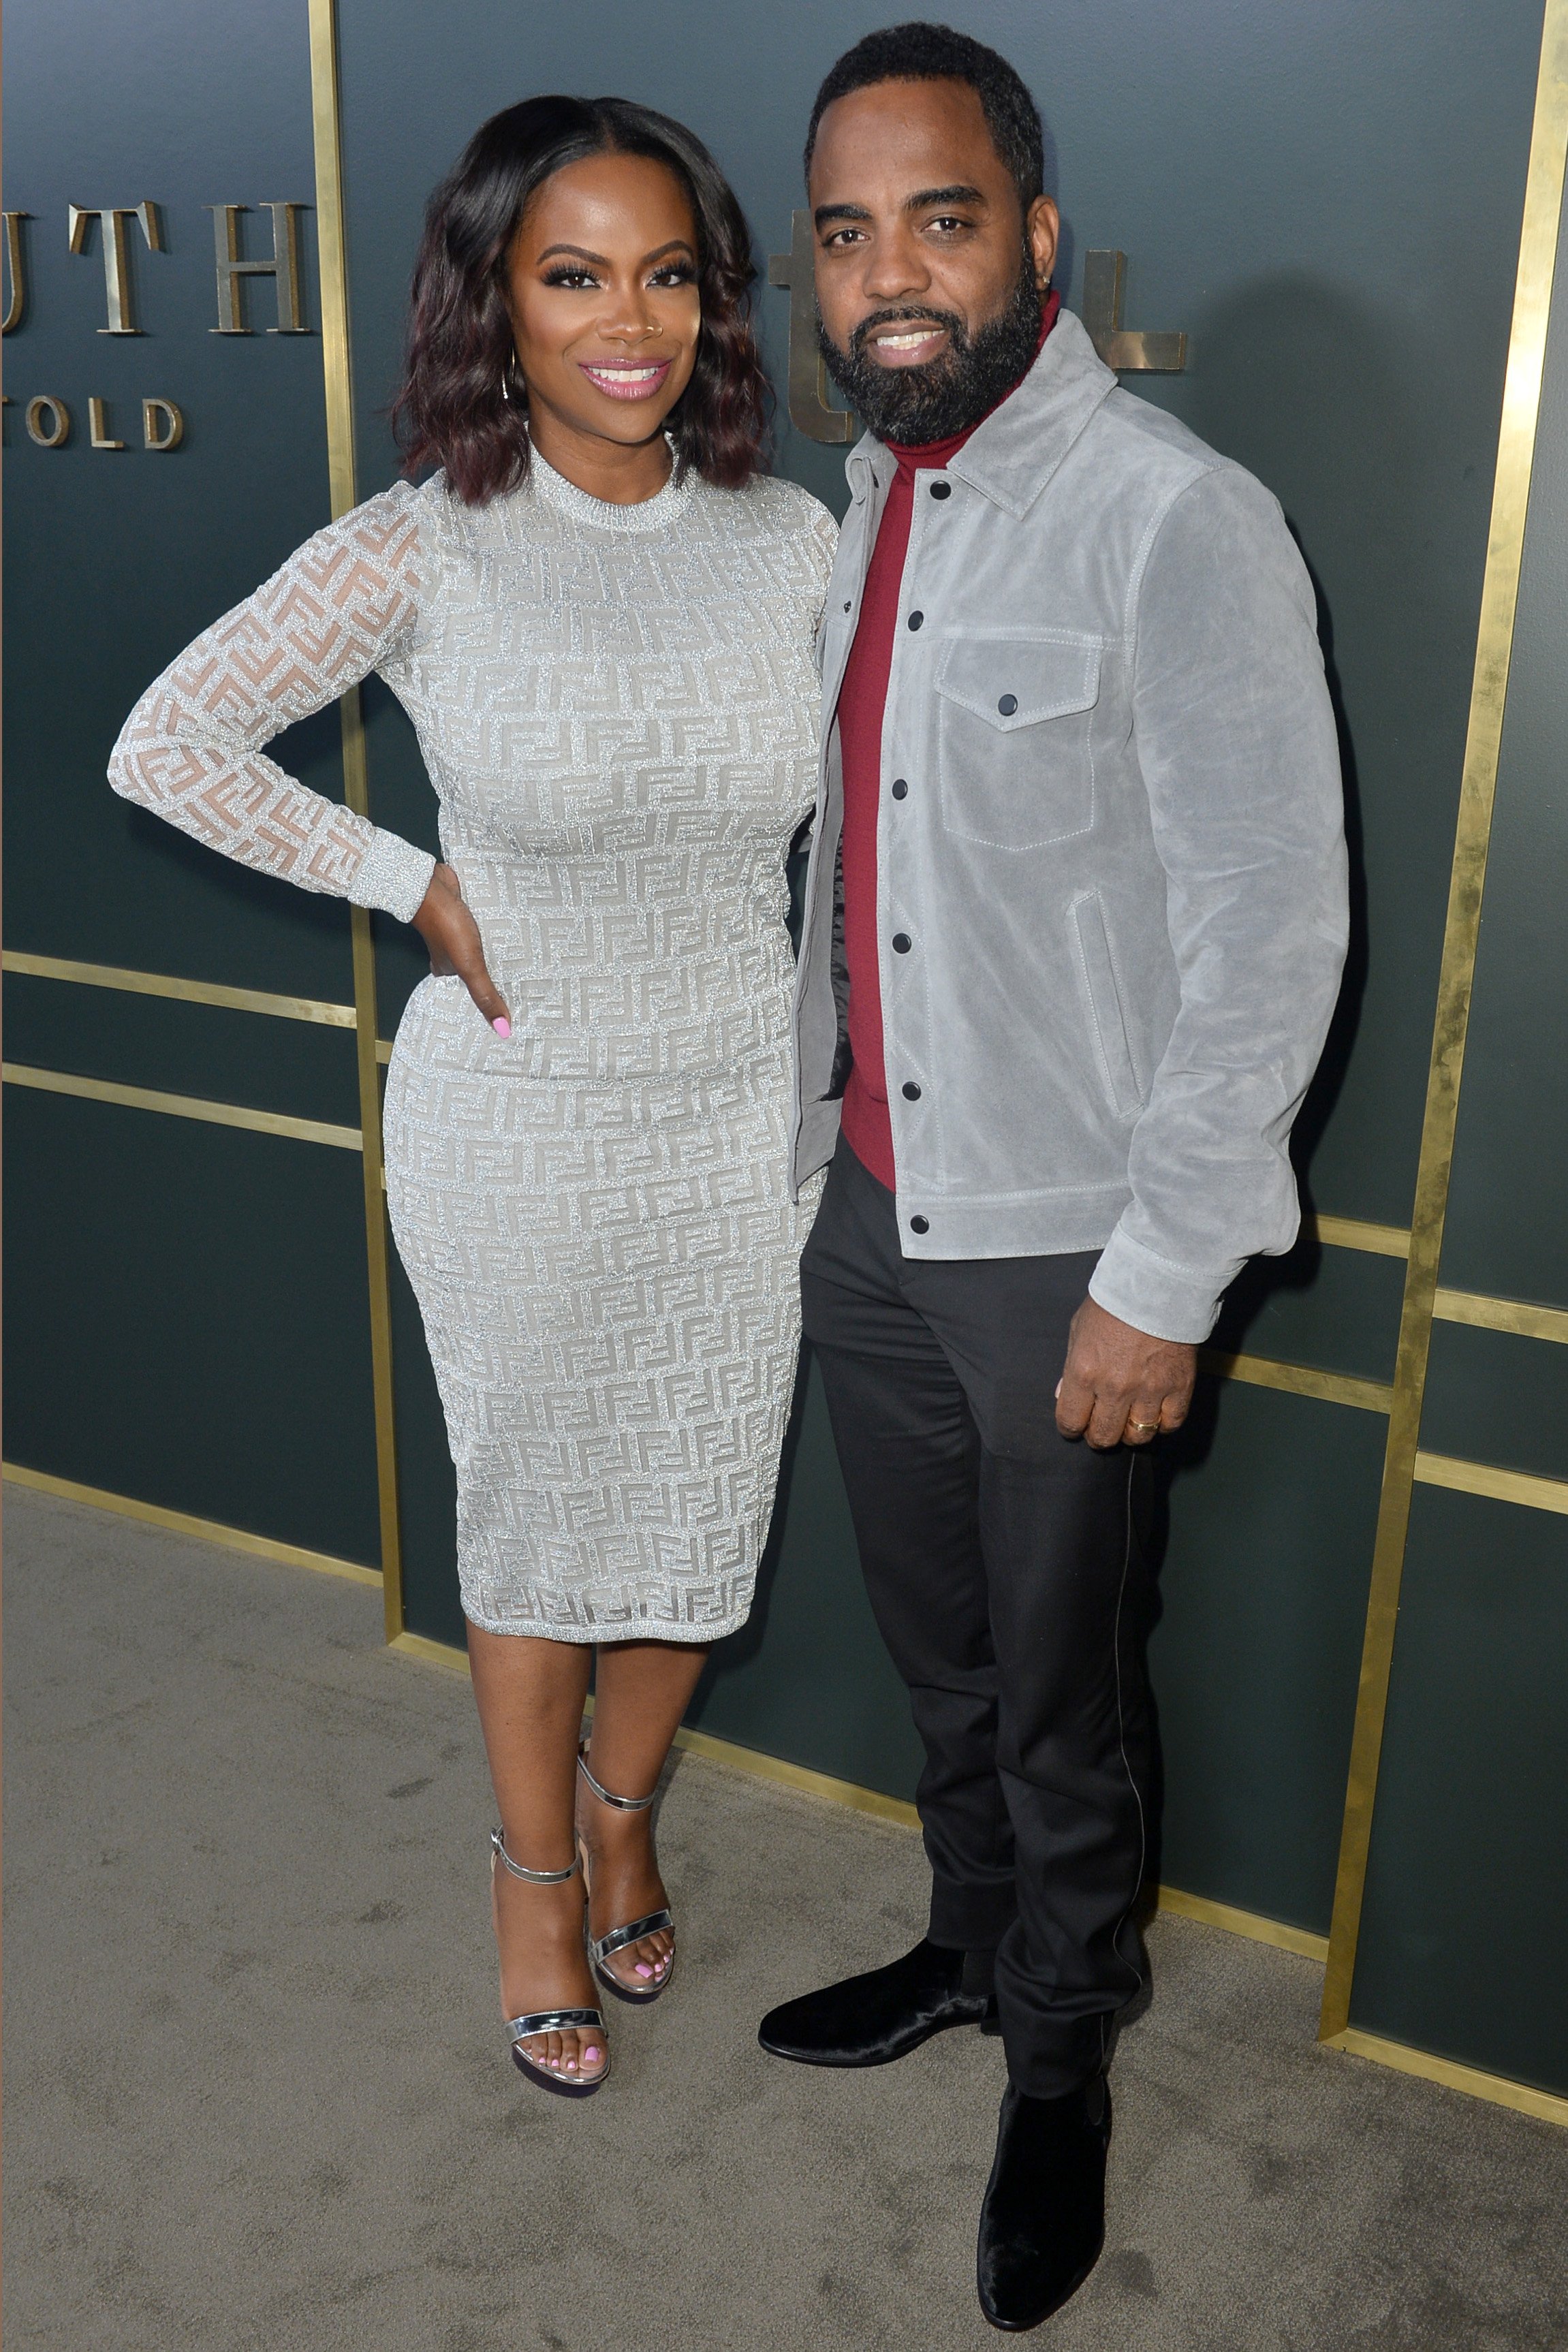 Kandi Burruss & Todd Tucker at the premiere of Apple TV+'s "Truth Be Told" on November 11, 2019 in California | Photo: Getty Images